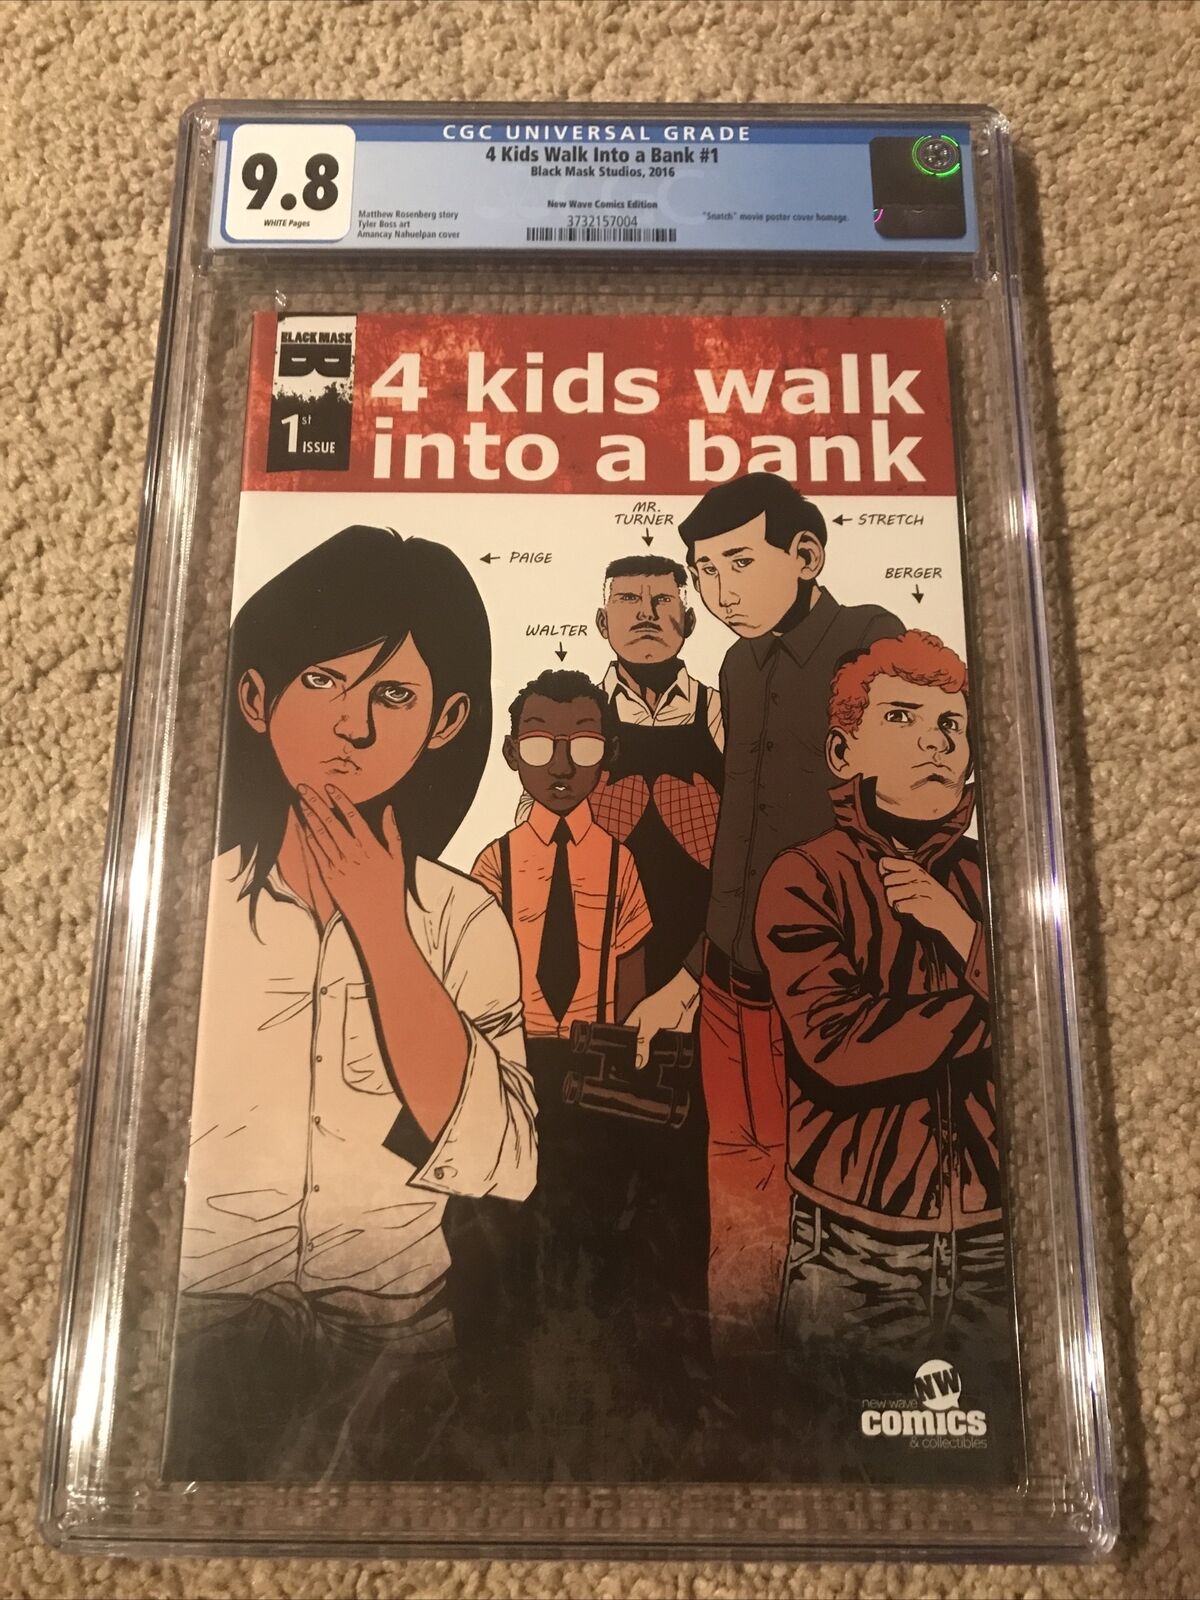 4 Kids Walk Into a Bank #1 CGC 9.8 Only 250 copies  Optioned Show.